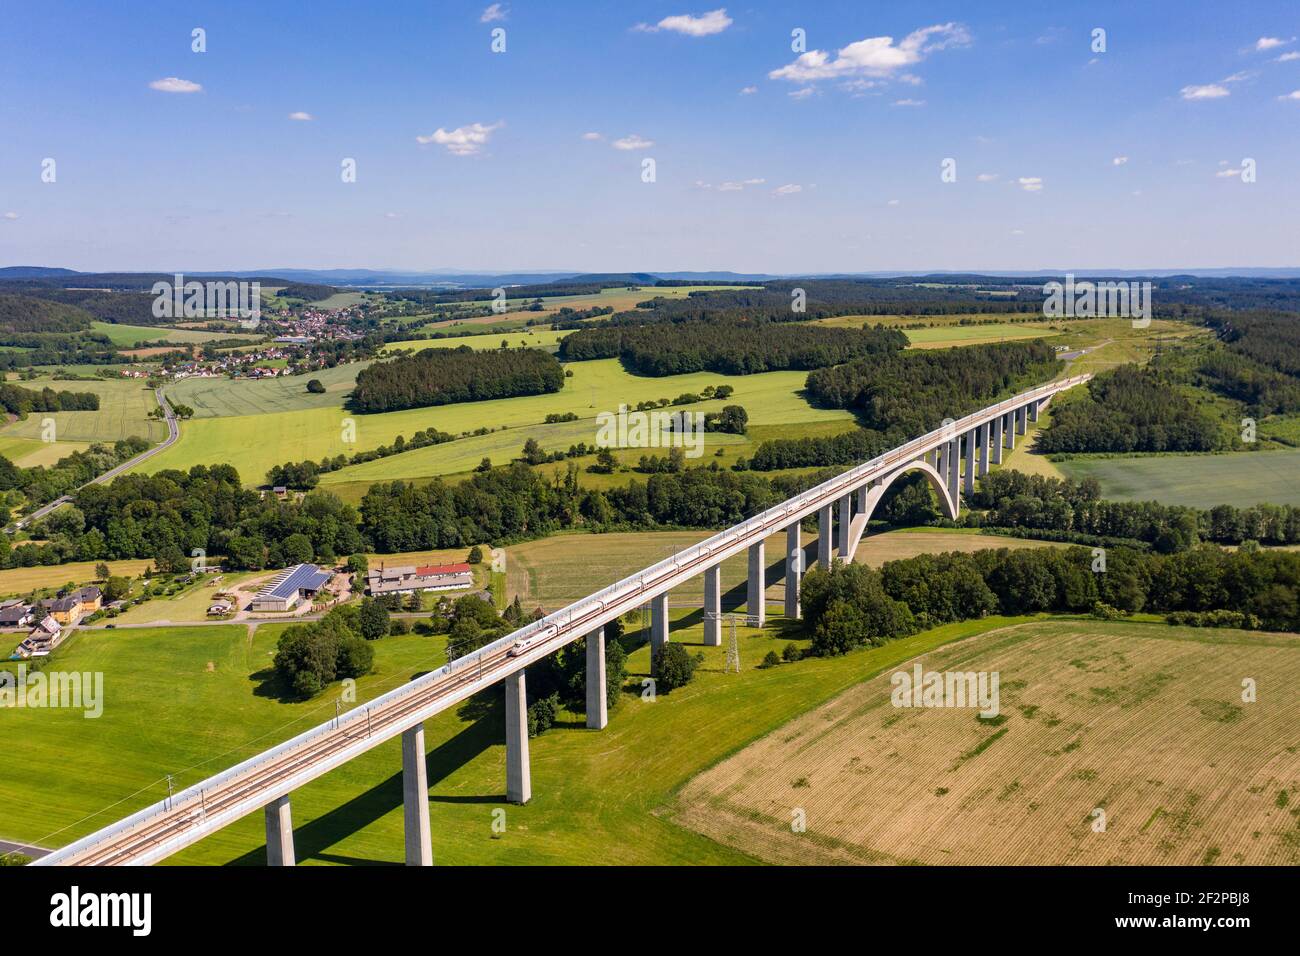 ICE, bridge (1104 m long, 71 m high), fields, forests, hilly landscape, aerial view Stock Photo